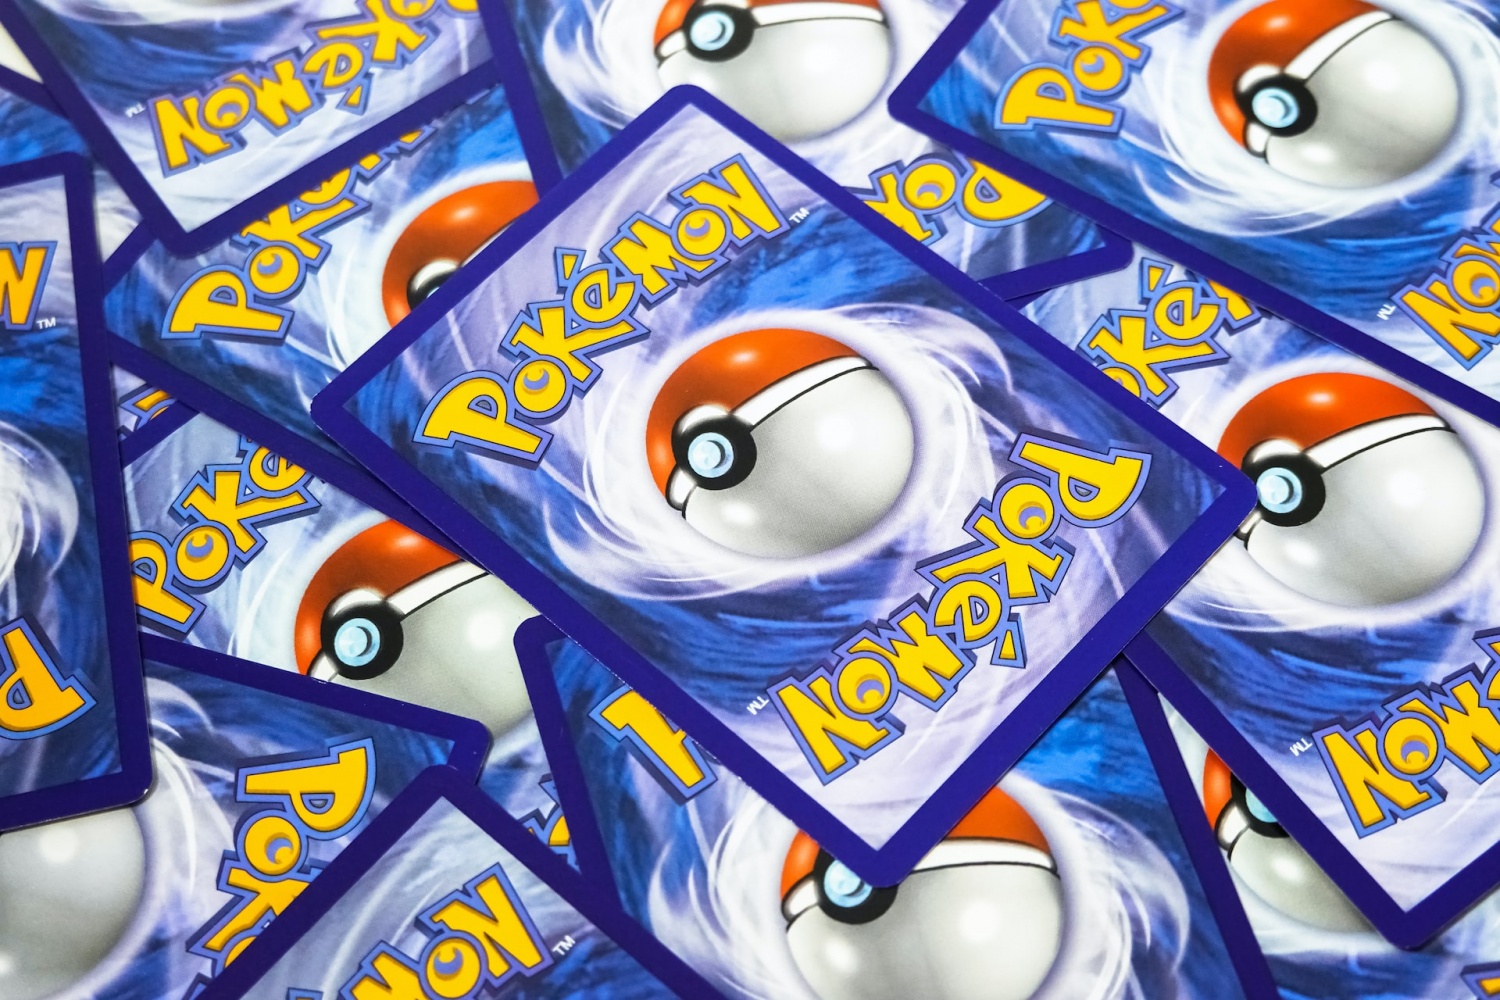 $70K of Stolen Pokemon Cards were Hidden in the Thief's Mom's House: Here's What Happened